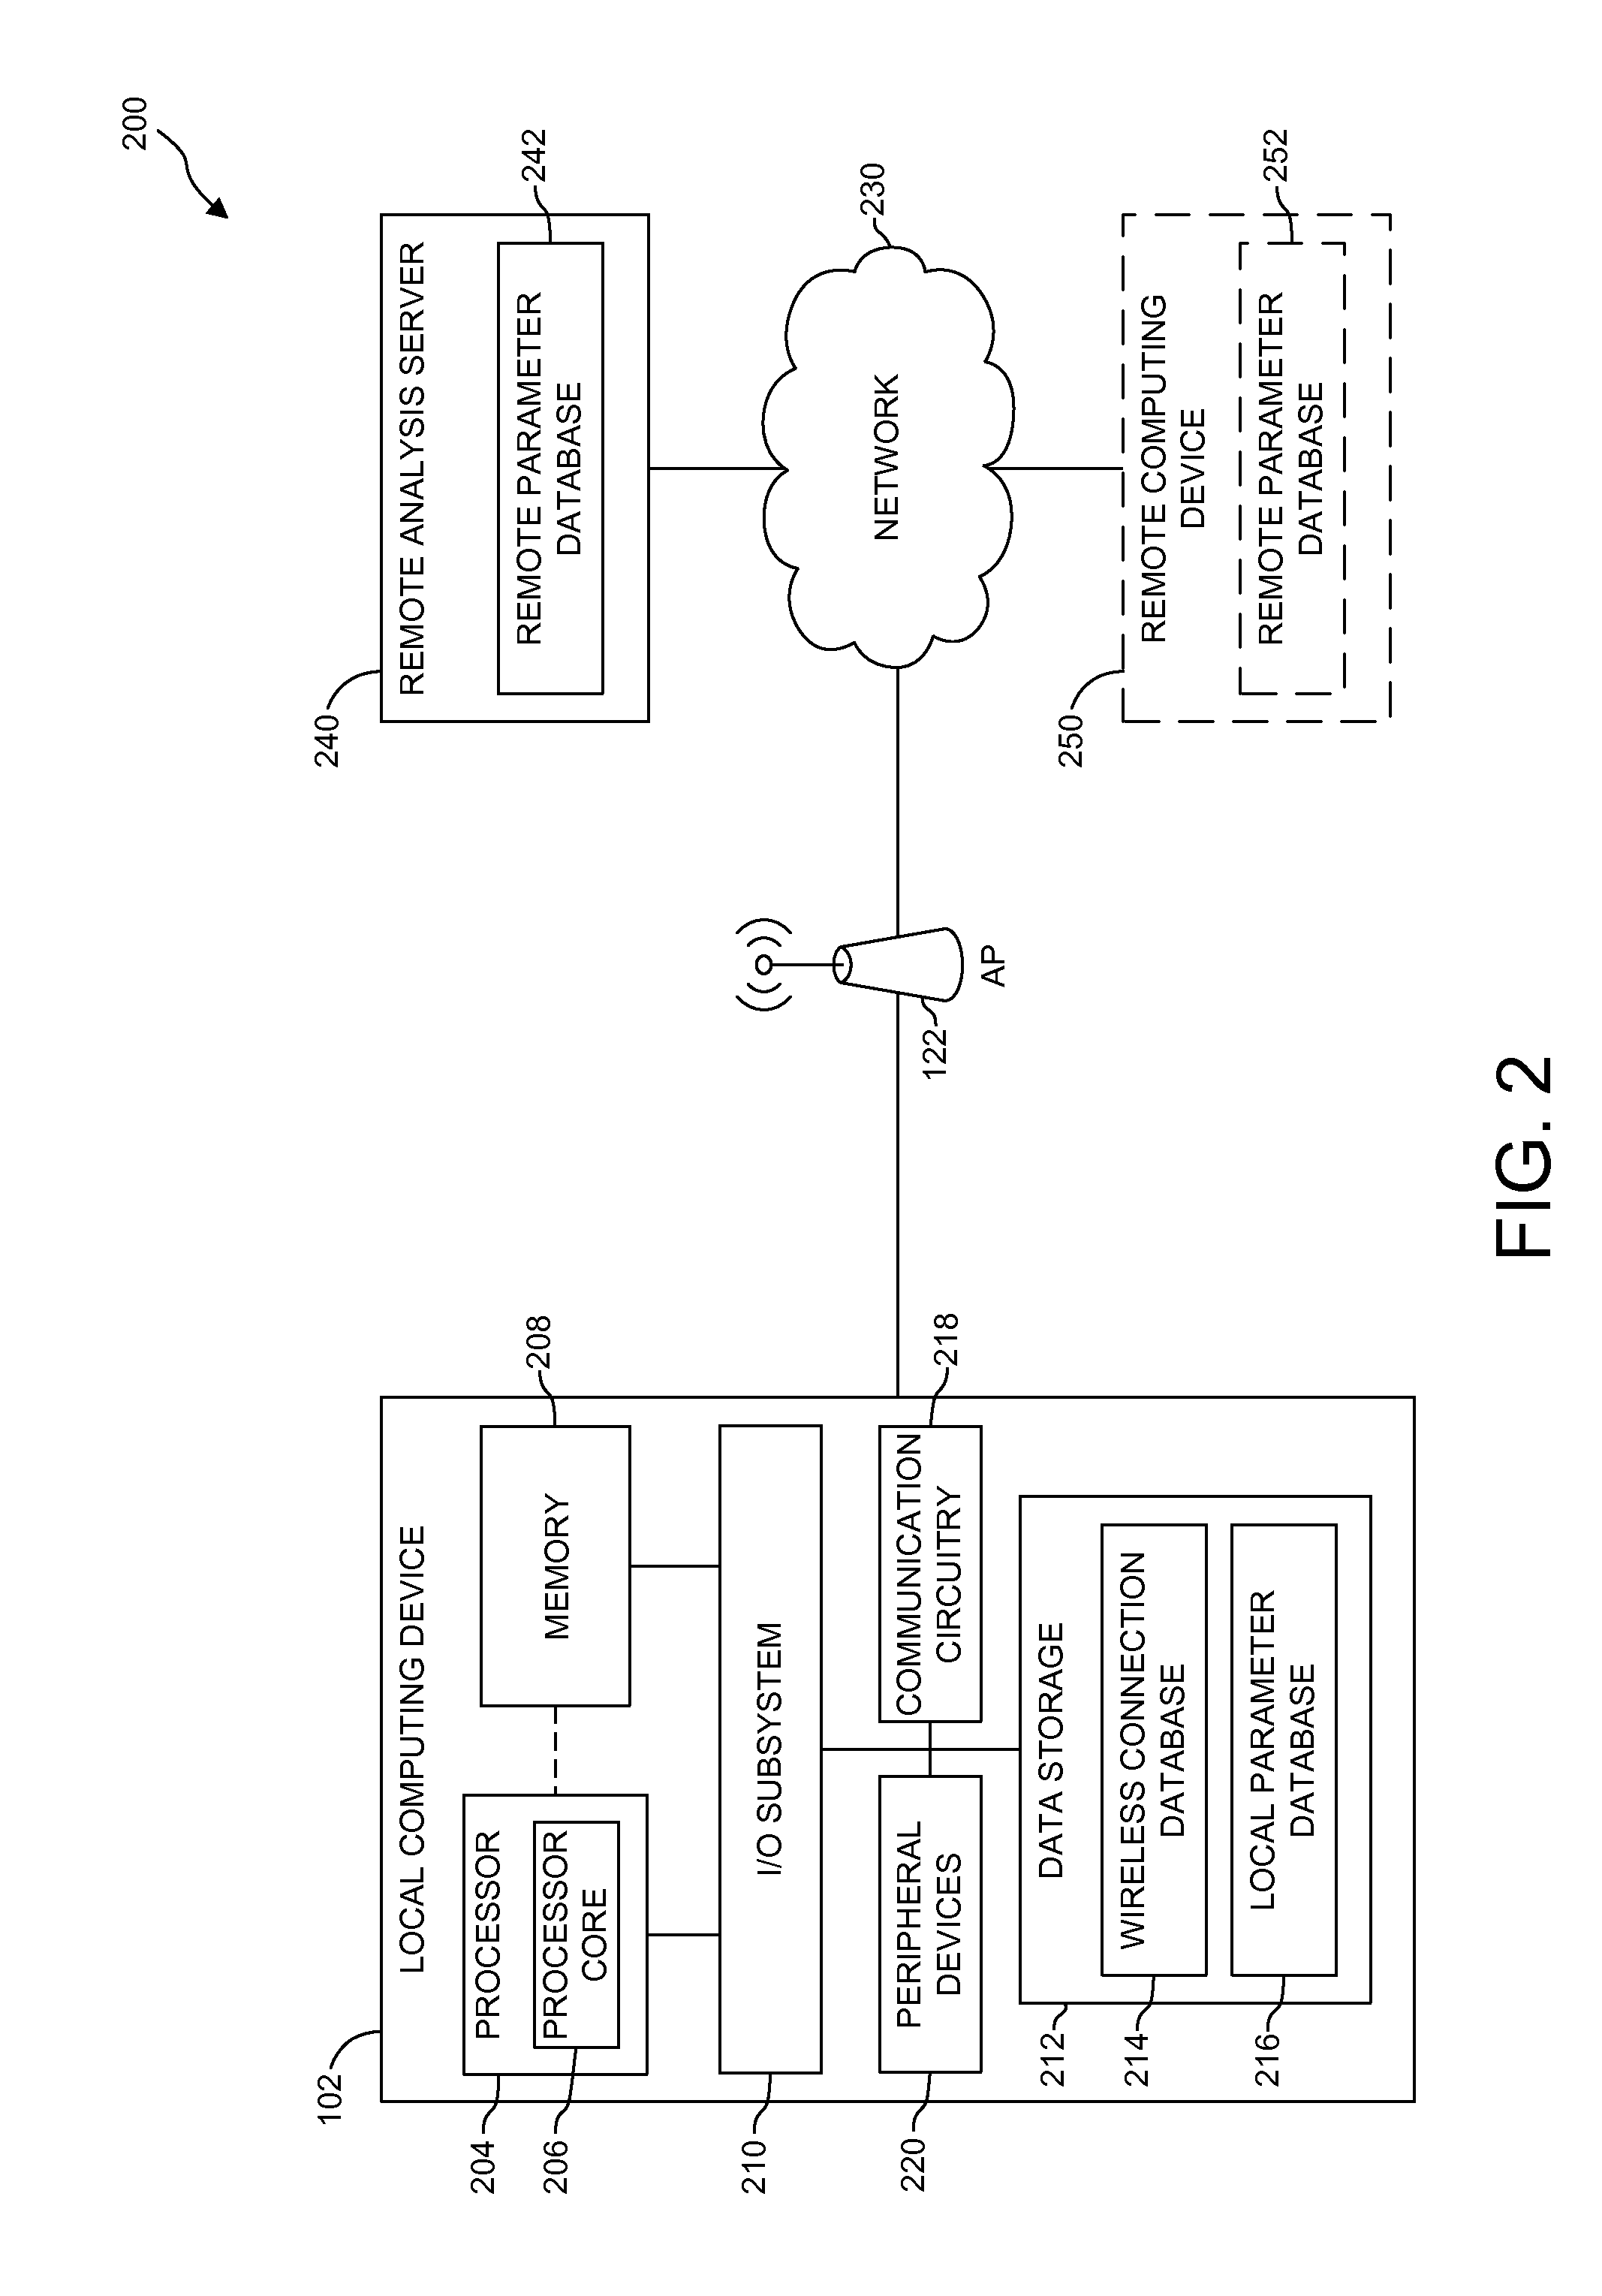 Mixed off-site/on-site prediction computation for reducing wireless reconnection time of a computing device